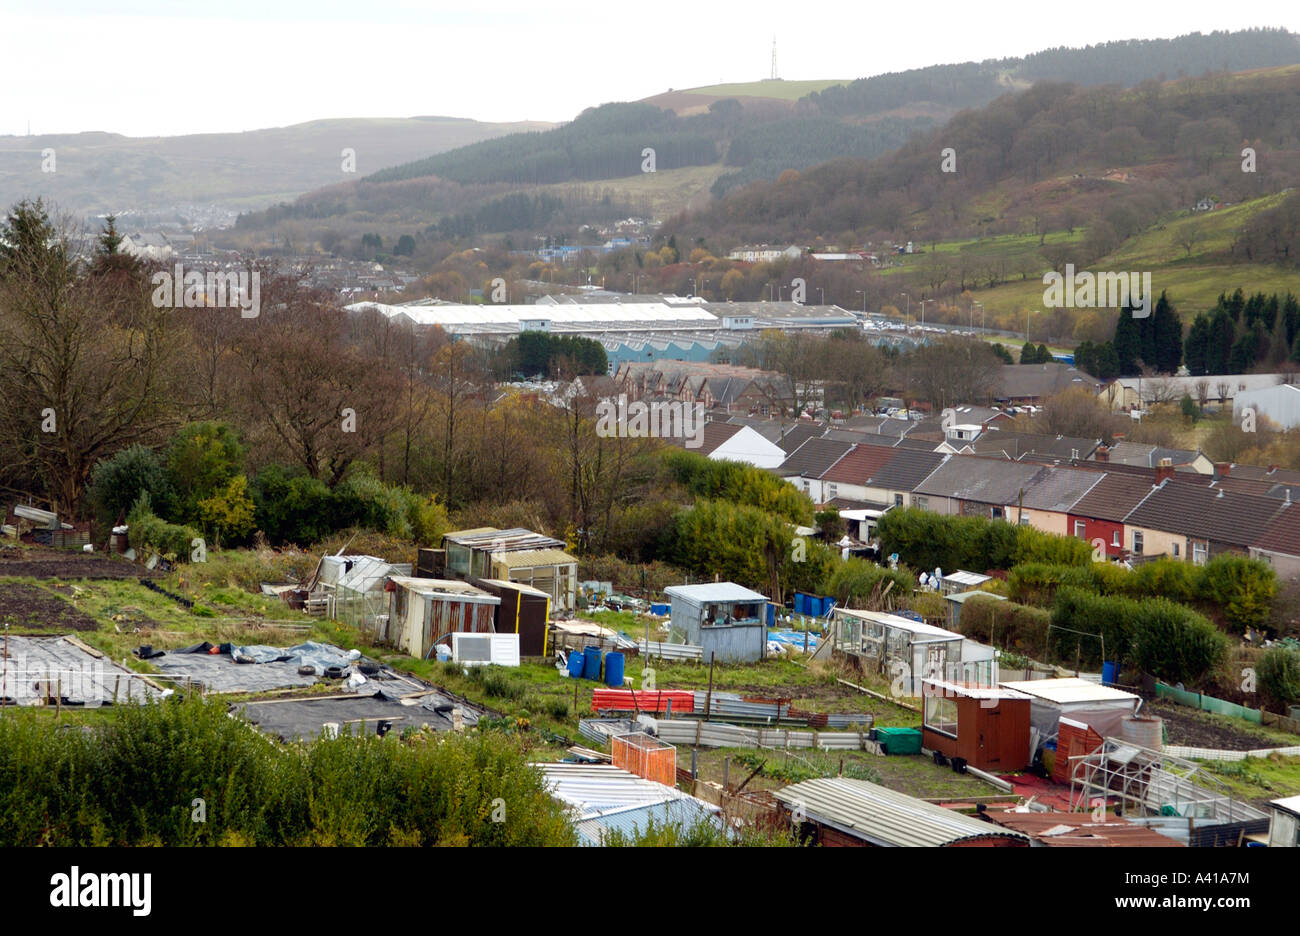 Burberry clothing factory centre frame in Treorchy Rhondda Valley Wales UK  viewed over garden & houses Stock Photo - Alamy